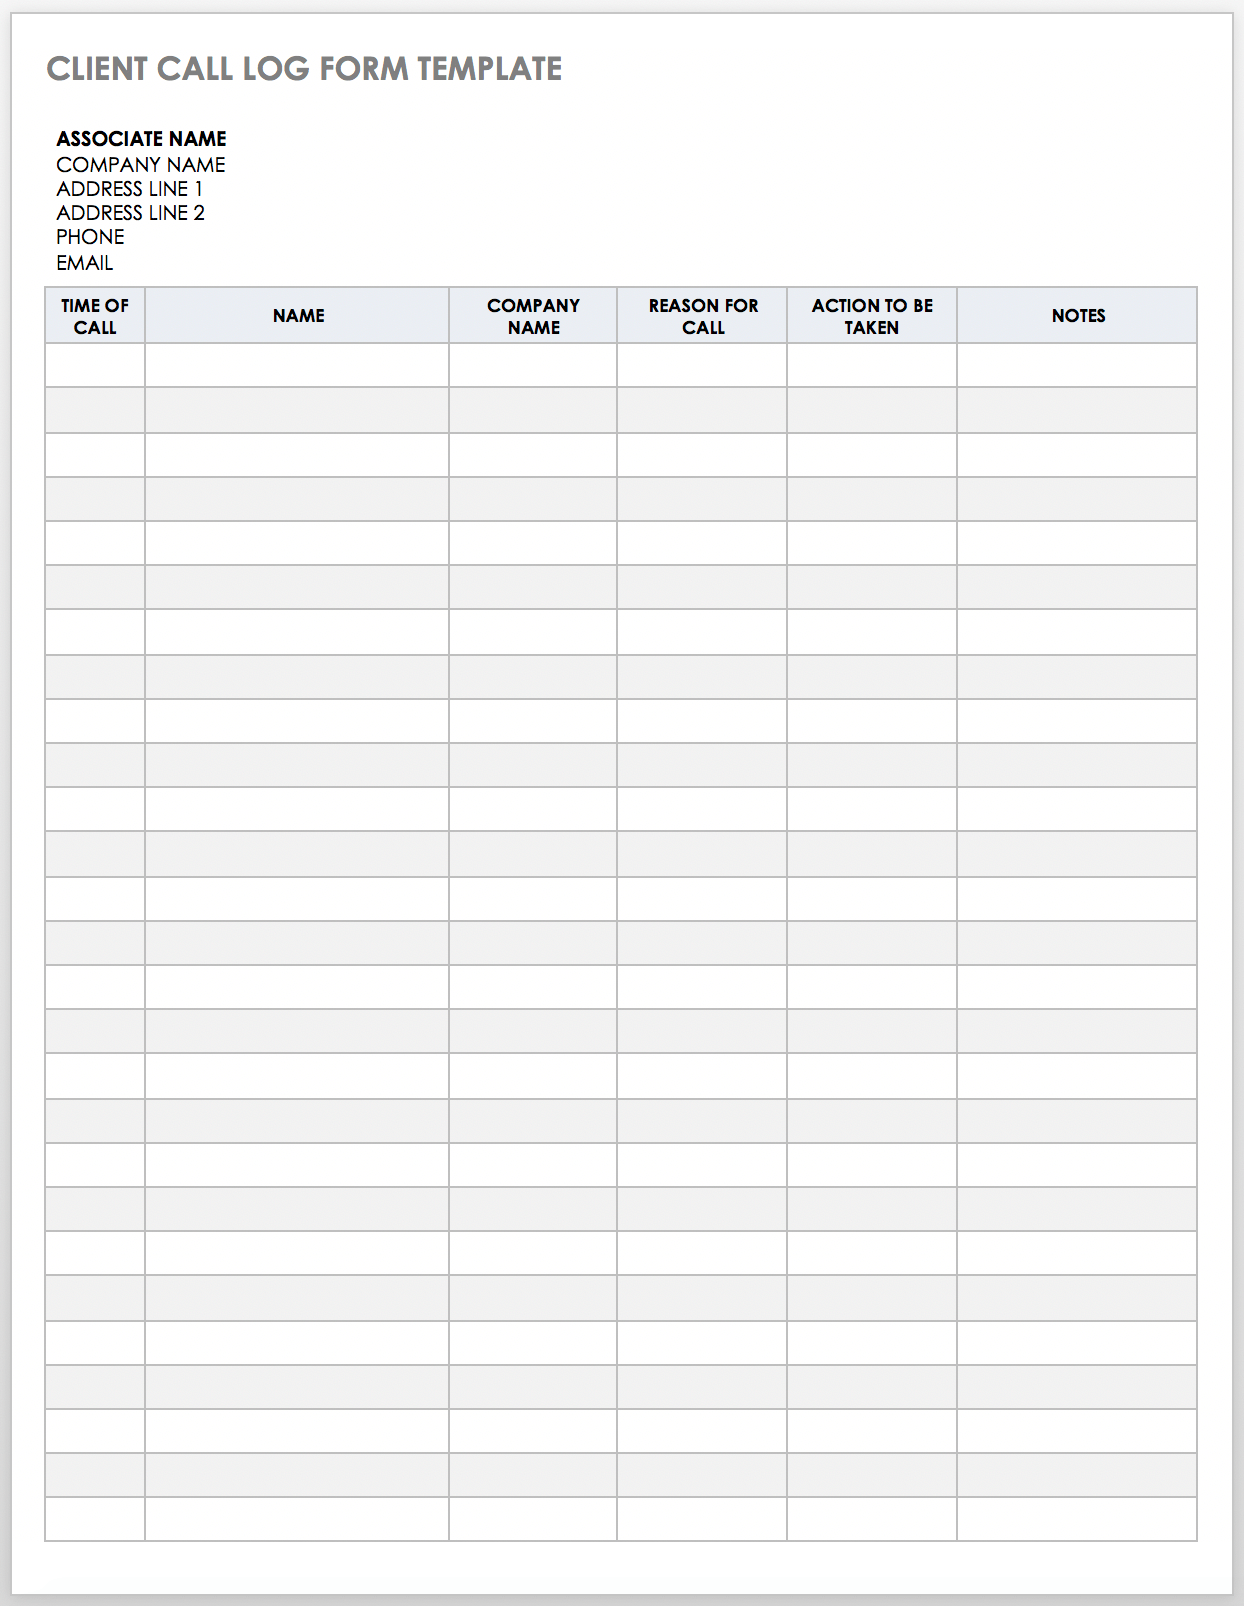 Free Client Call Log Templates  Smartsheet In Record Keeping Template For Small Business